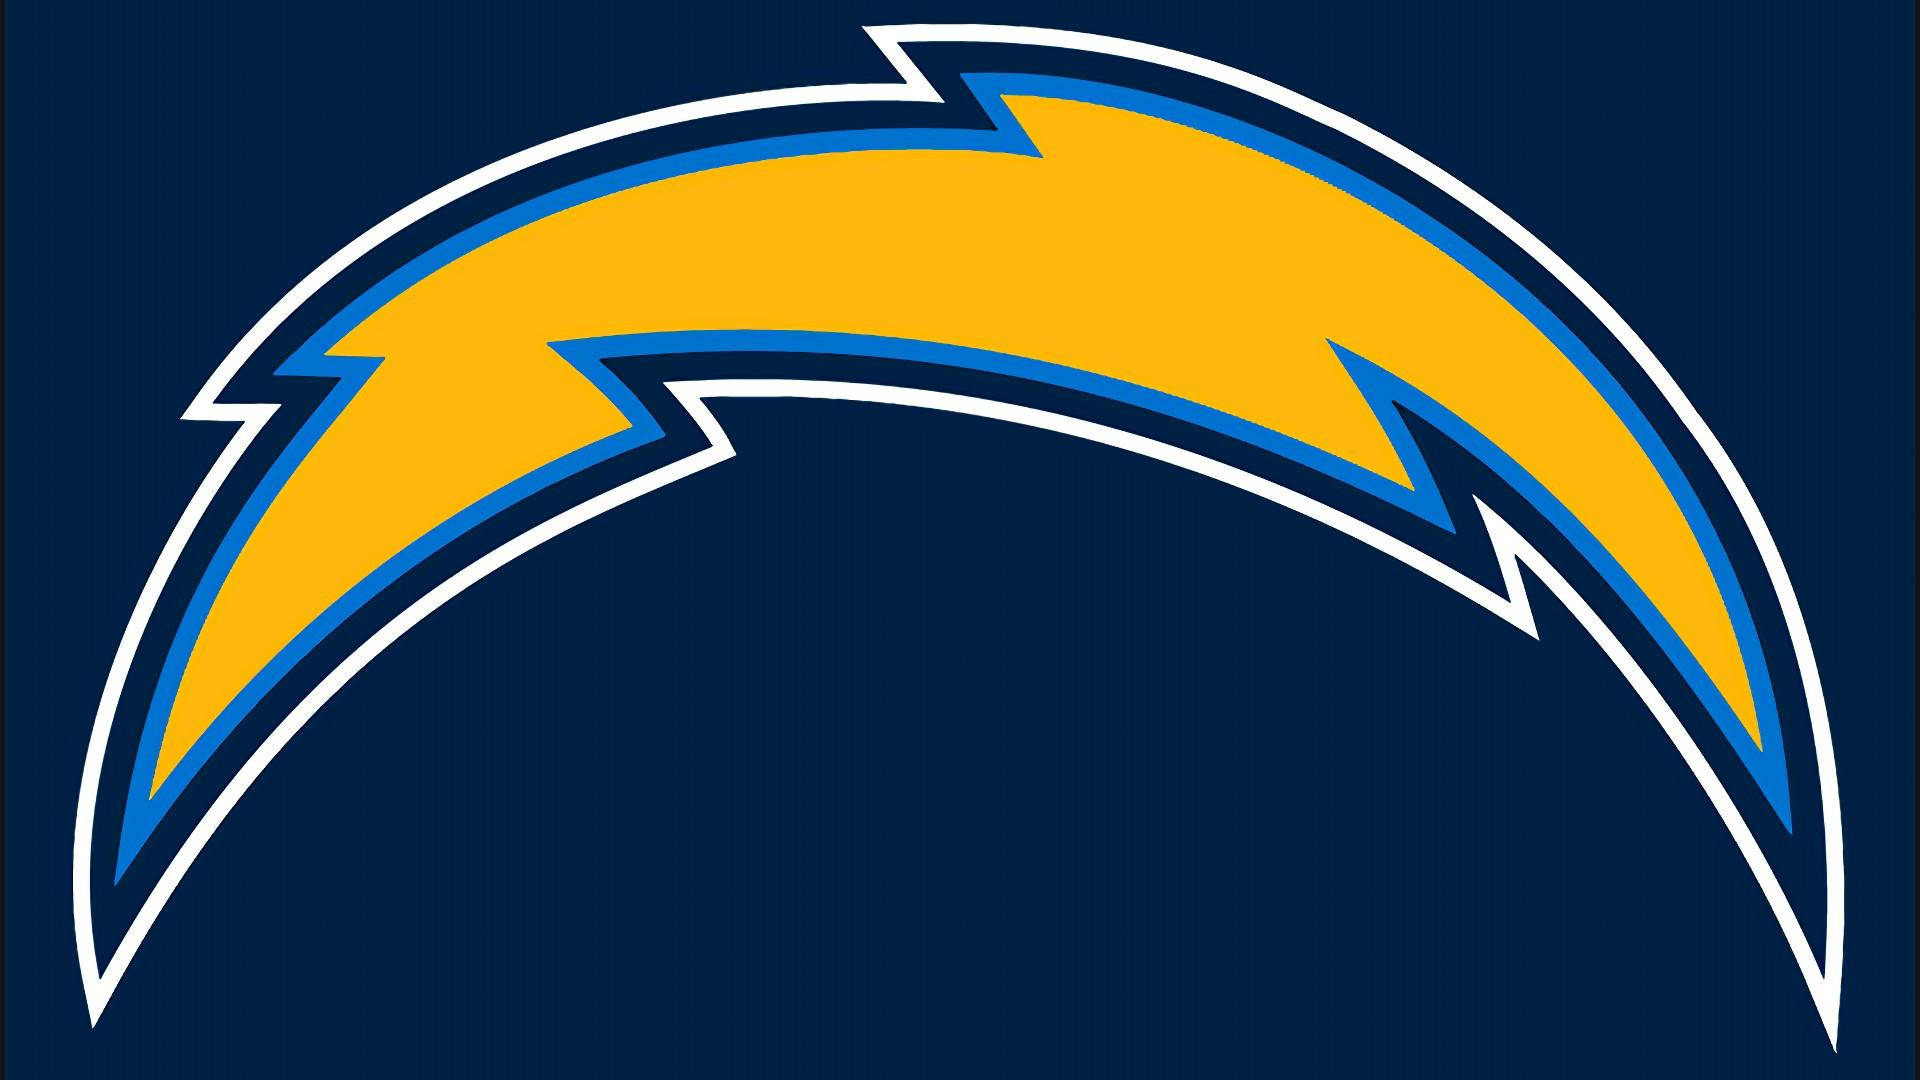 Los Angeles Chargers wallpaper  Los angeles chargers, Chargers football, Los  angeles chargers logo